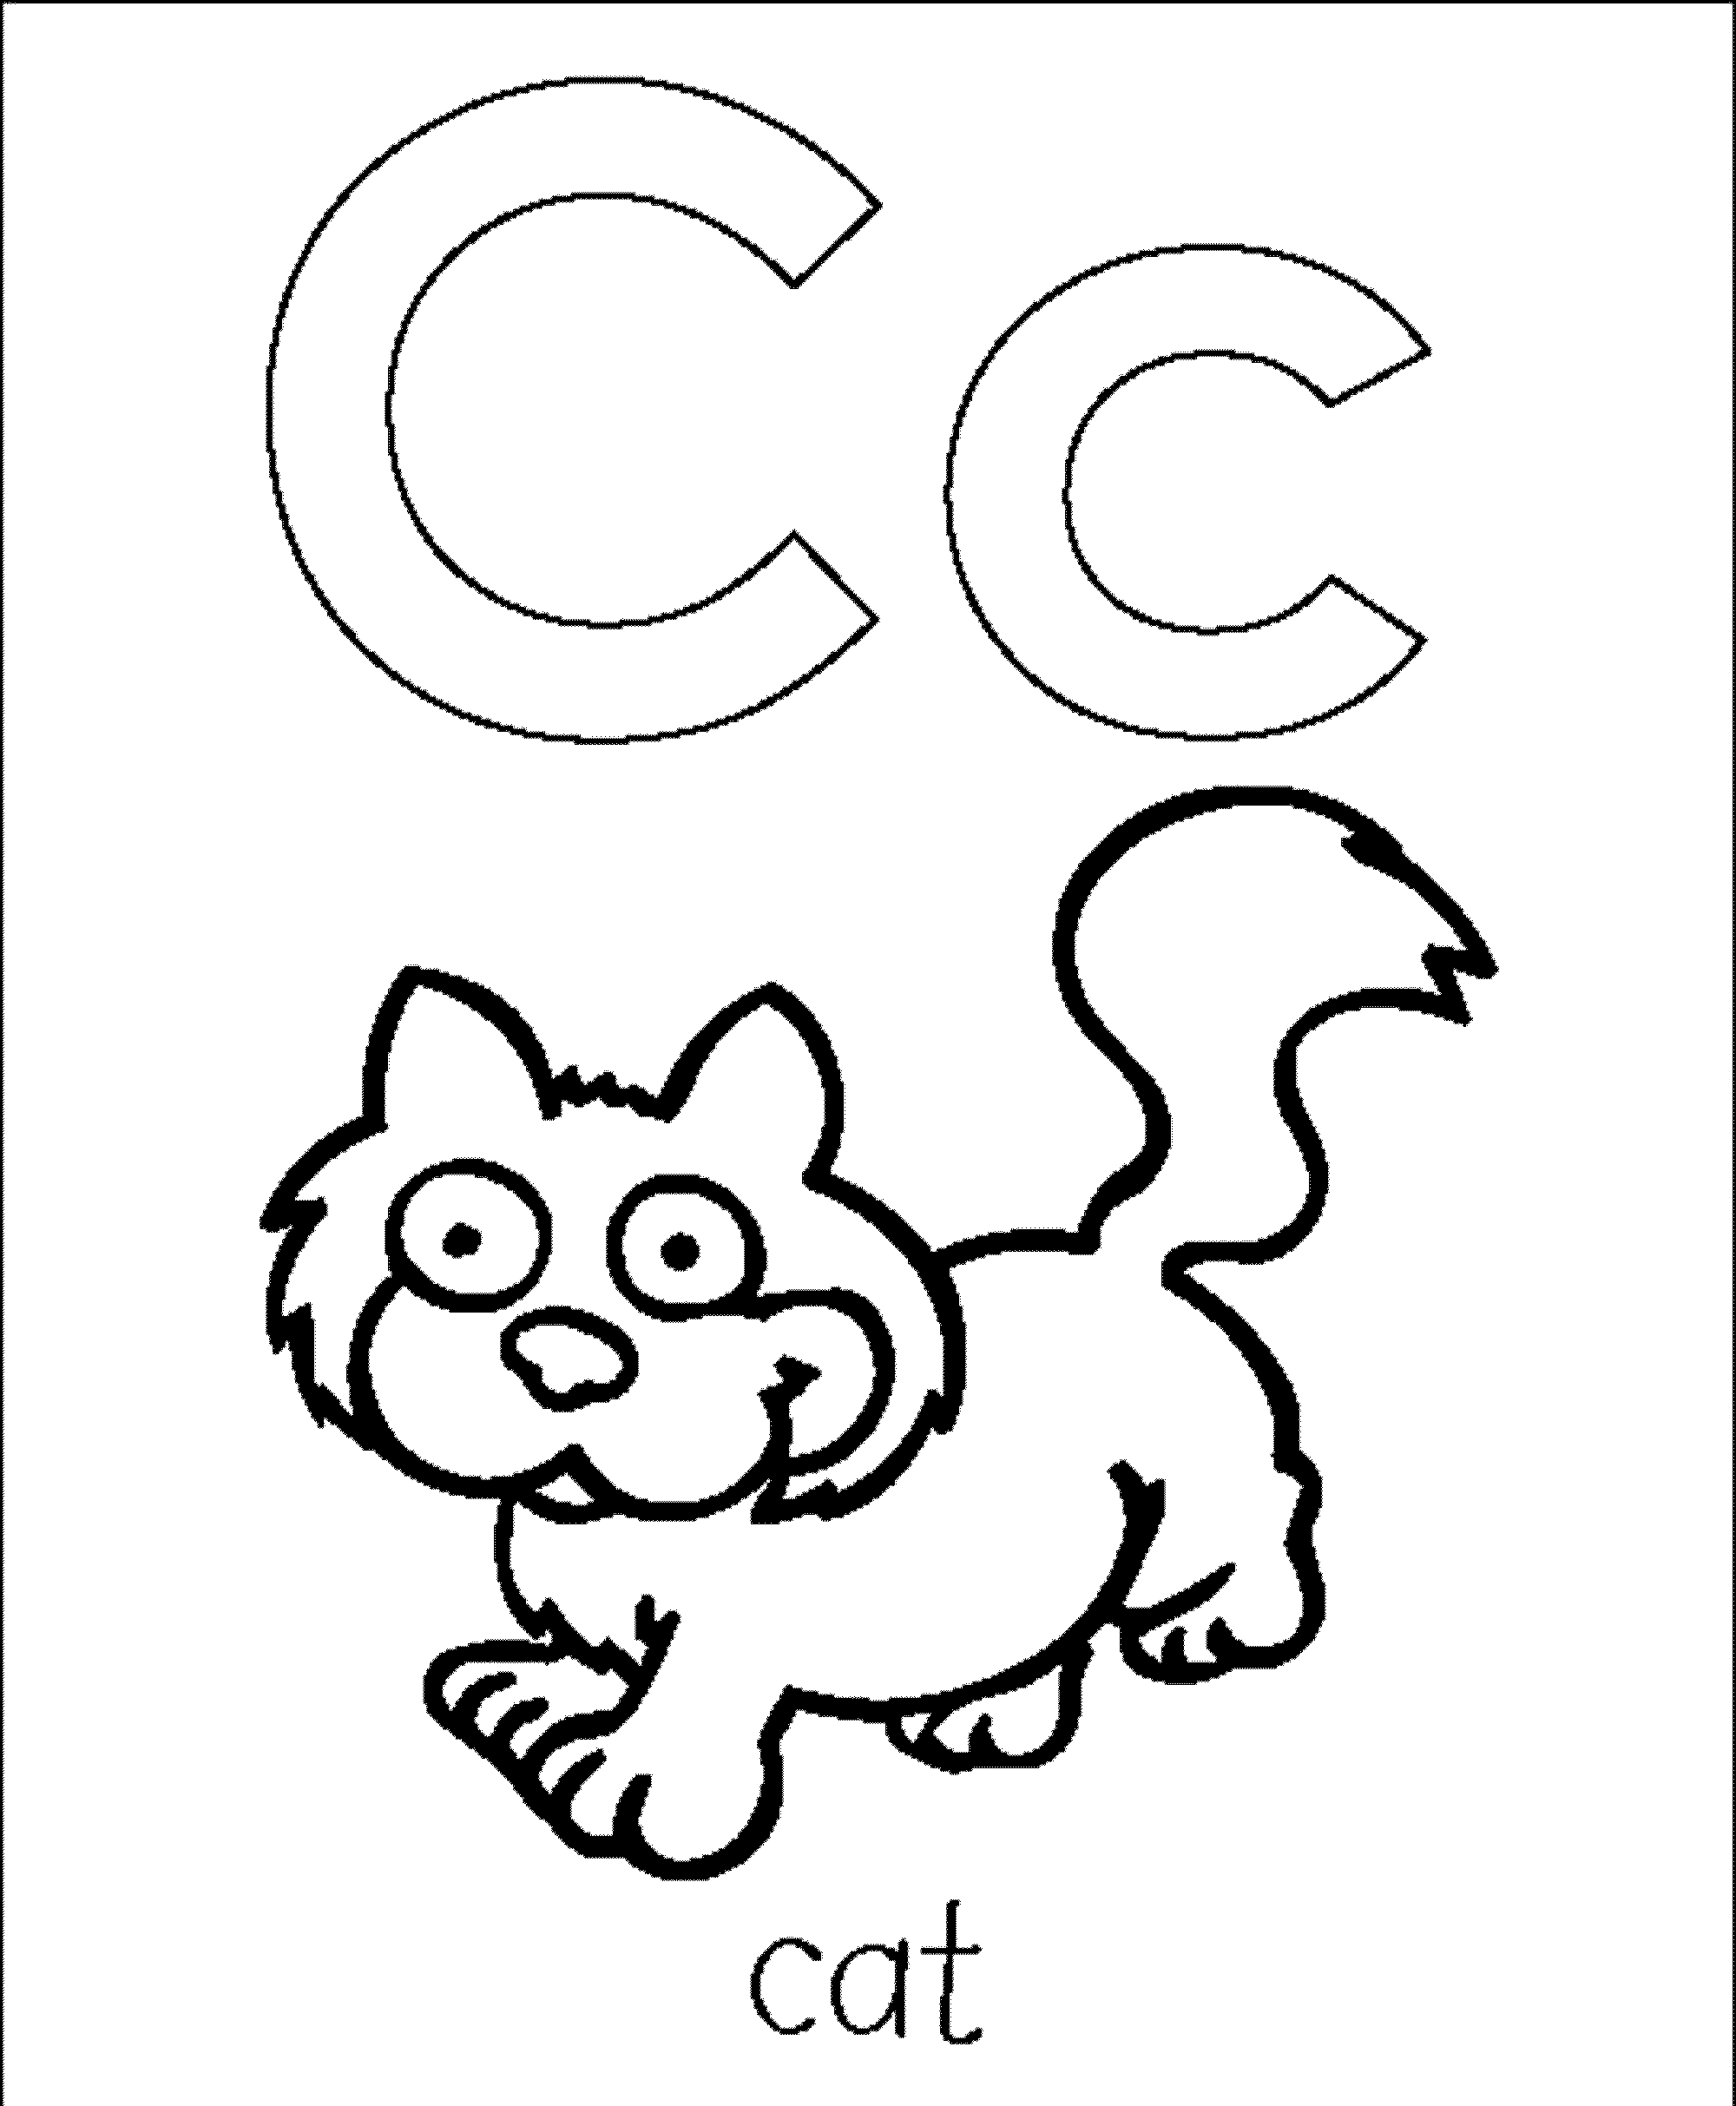 Free Letter C Coloring Pages Printable Download Free Letter C Coloring Pages Printable Png 